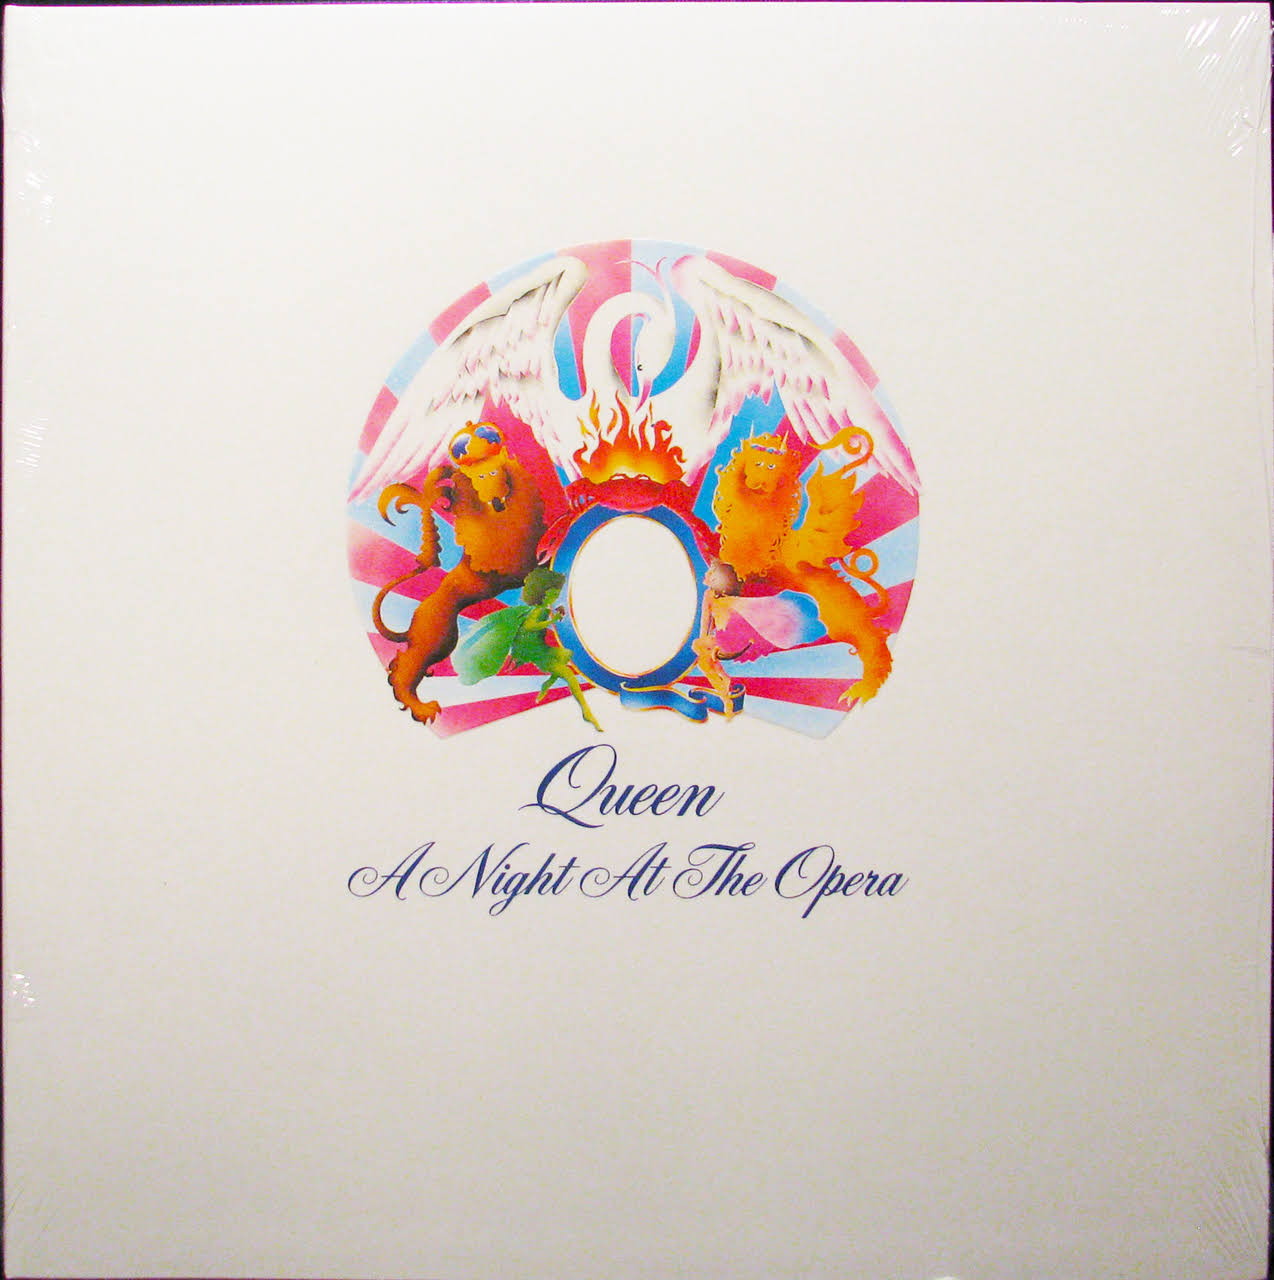 A Night at the Opera - Queen